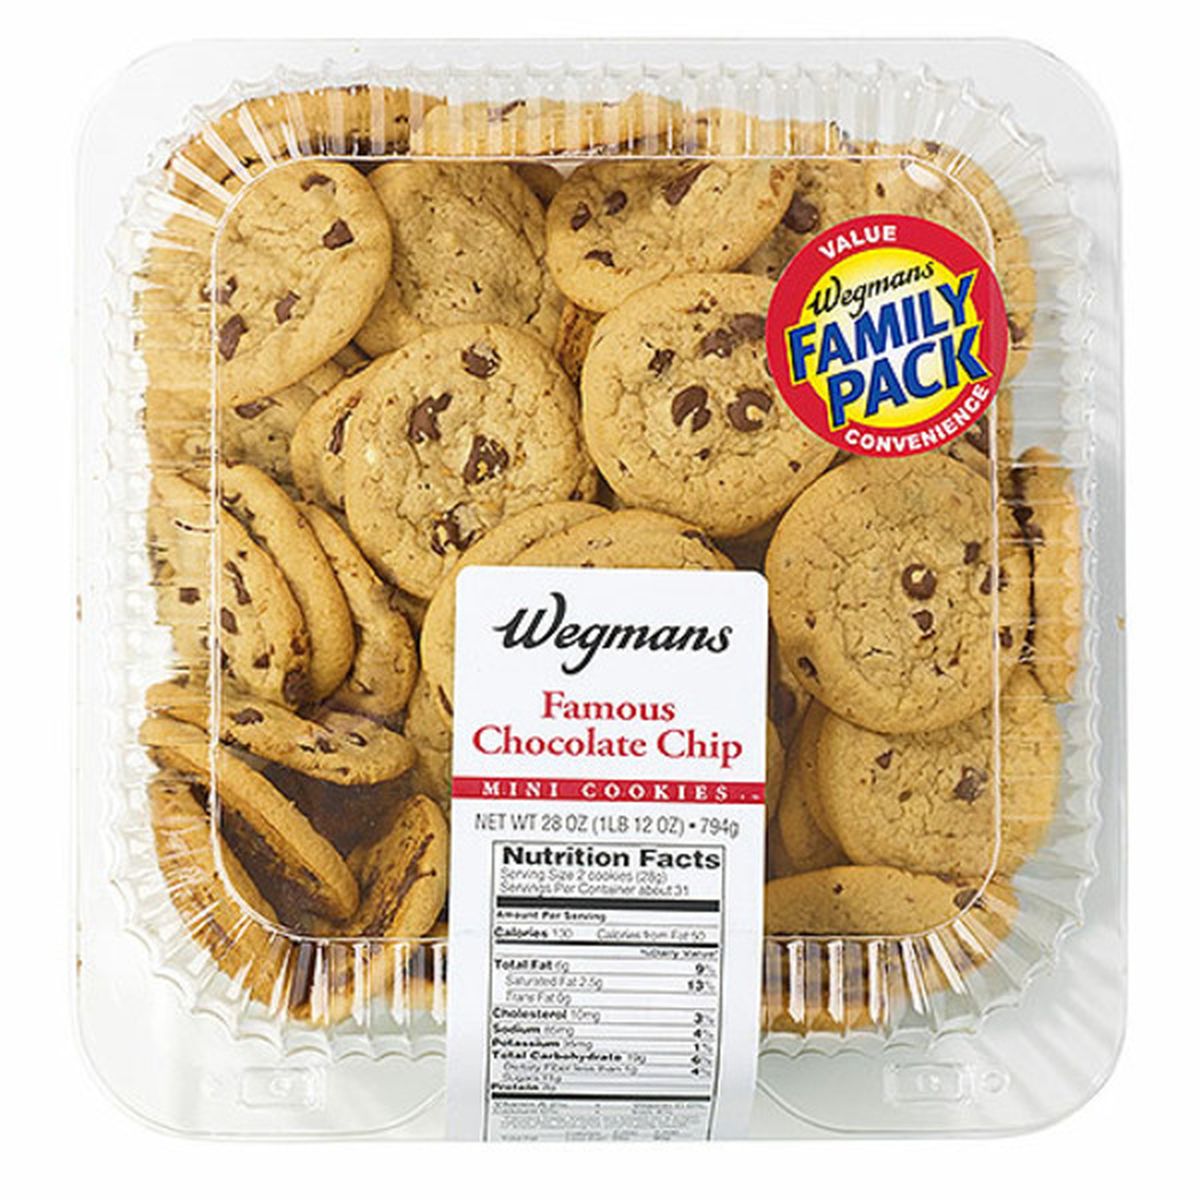 Calories in Wegmans Famous Chocolate Chip Mini Cookies, FAMILY PACK